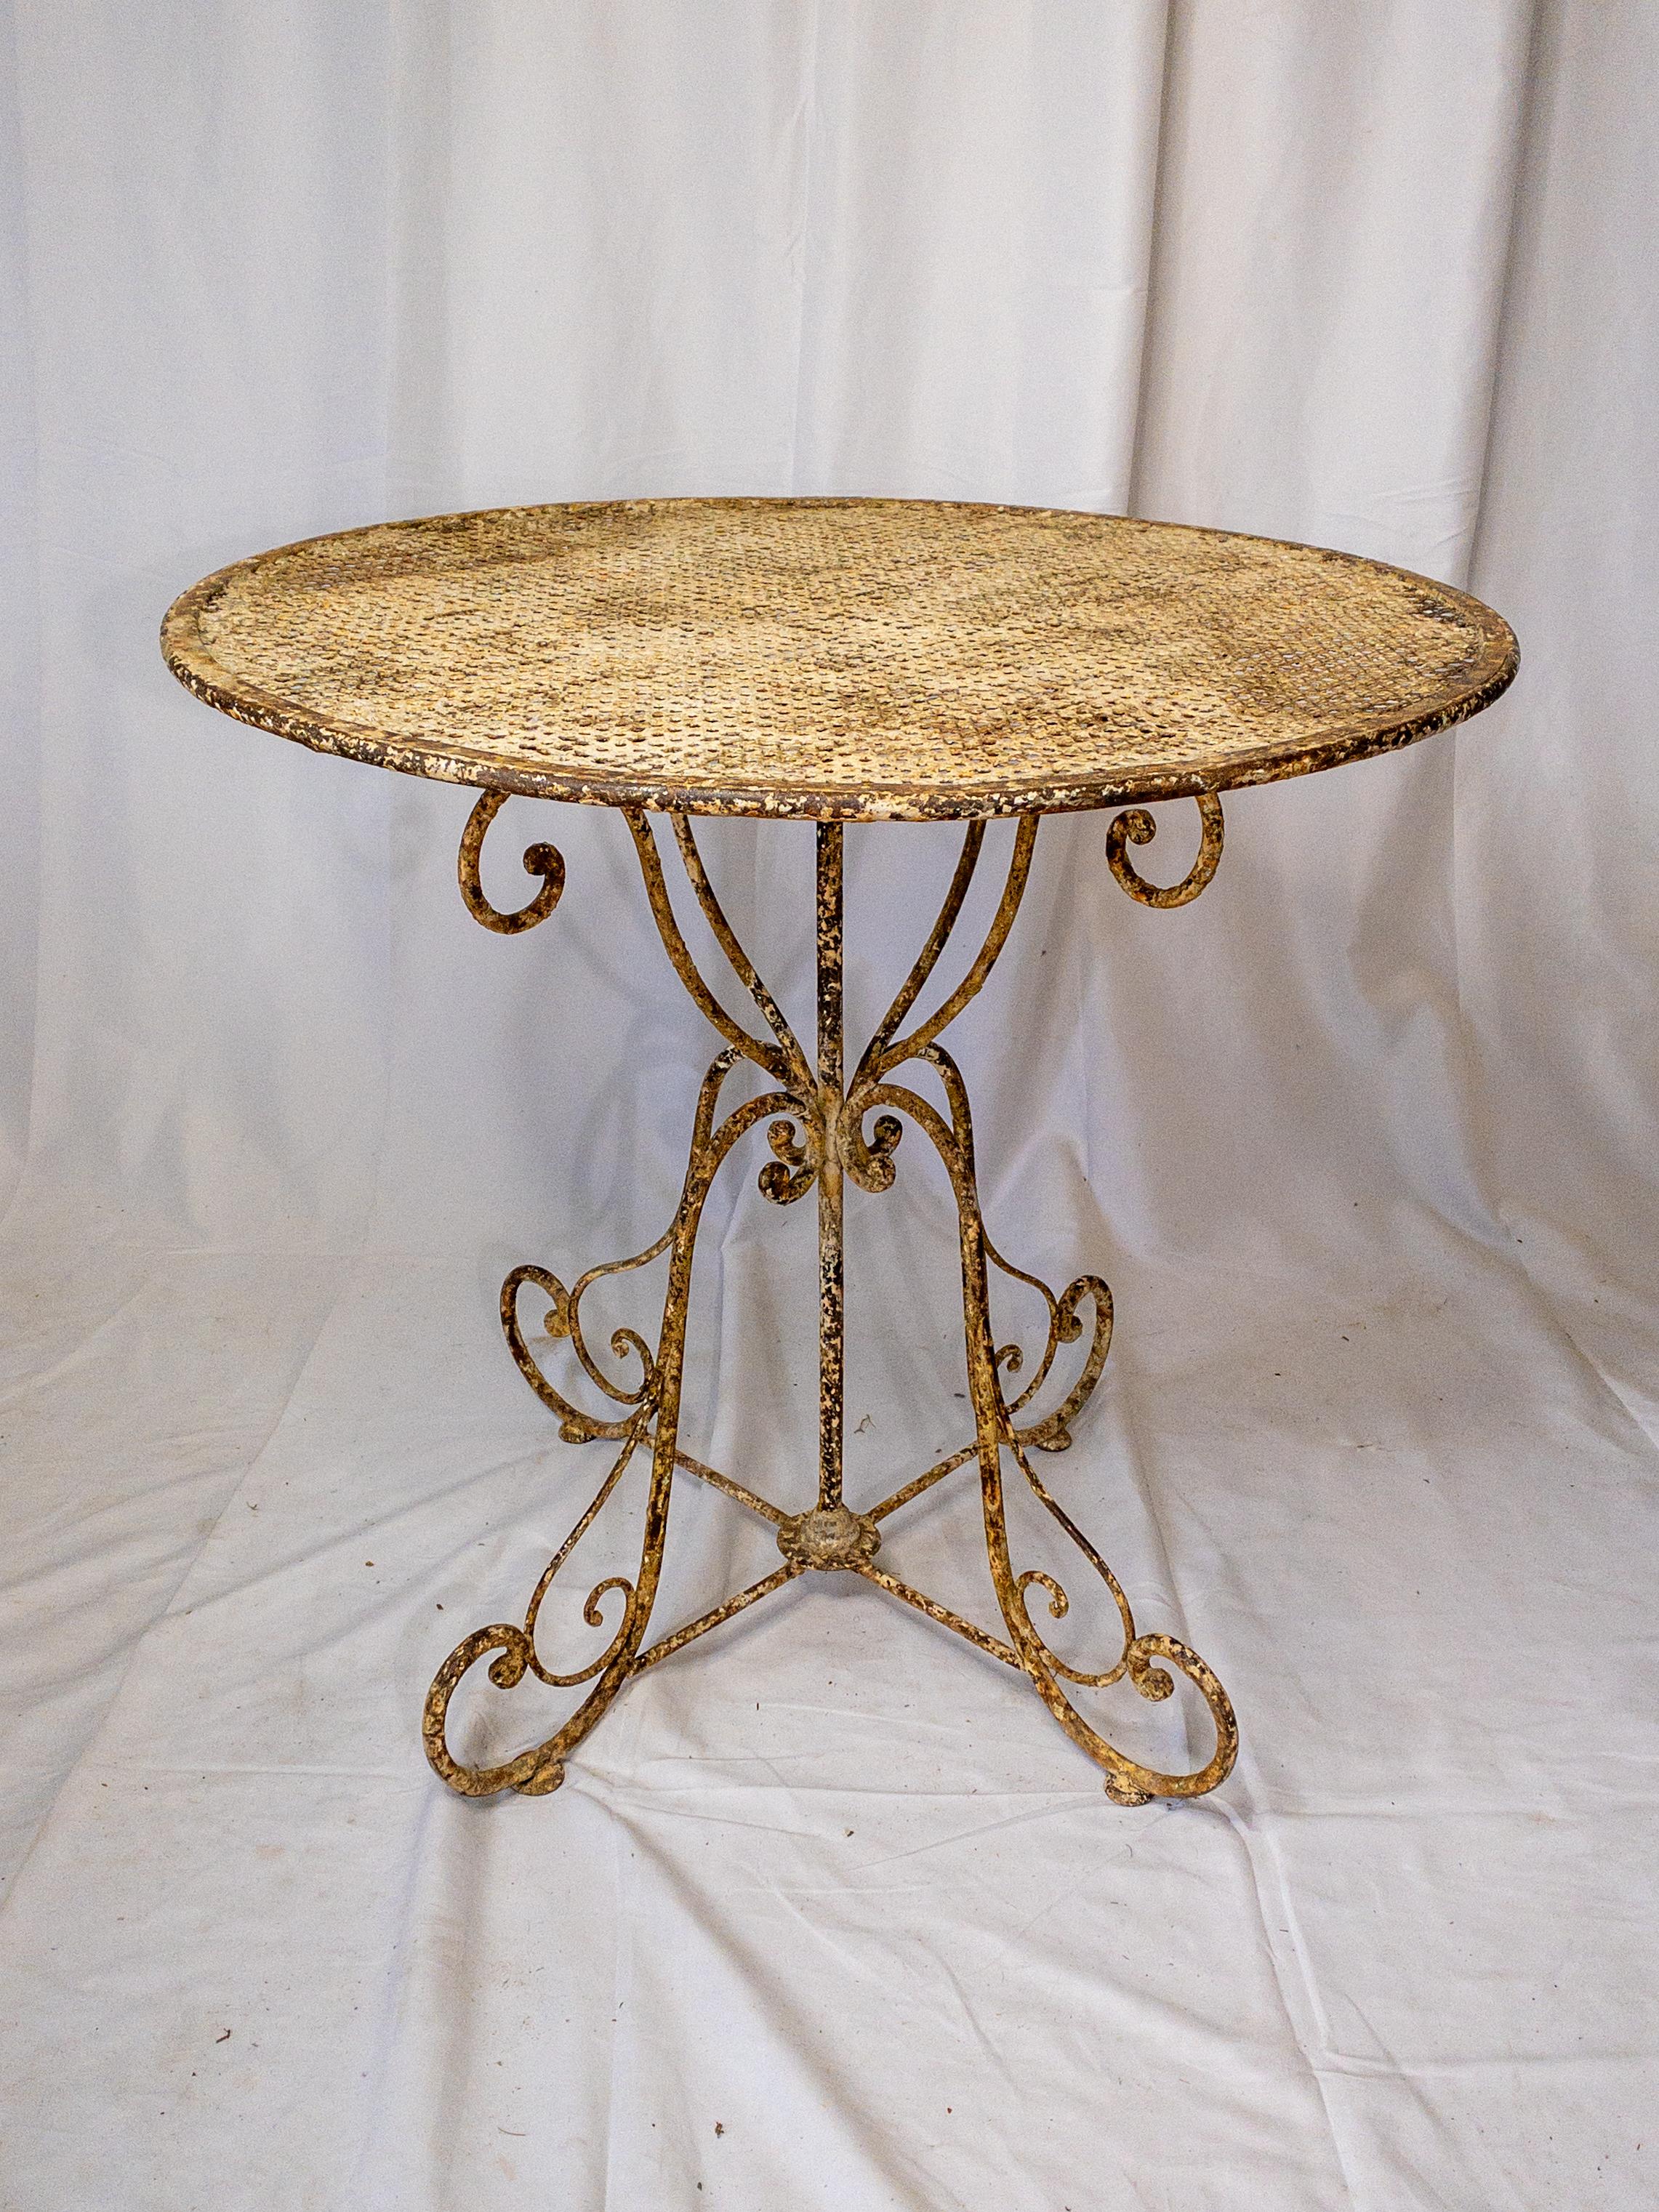 The French Napoleon III period wrought iron garden table exudes timeless charm with its elegant design and rustic allure. Crafted during a period known for its opulence and innovation, this round table showcases intricate wrought iron work,